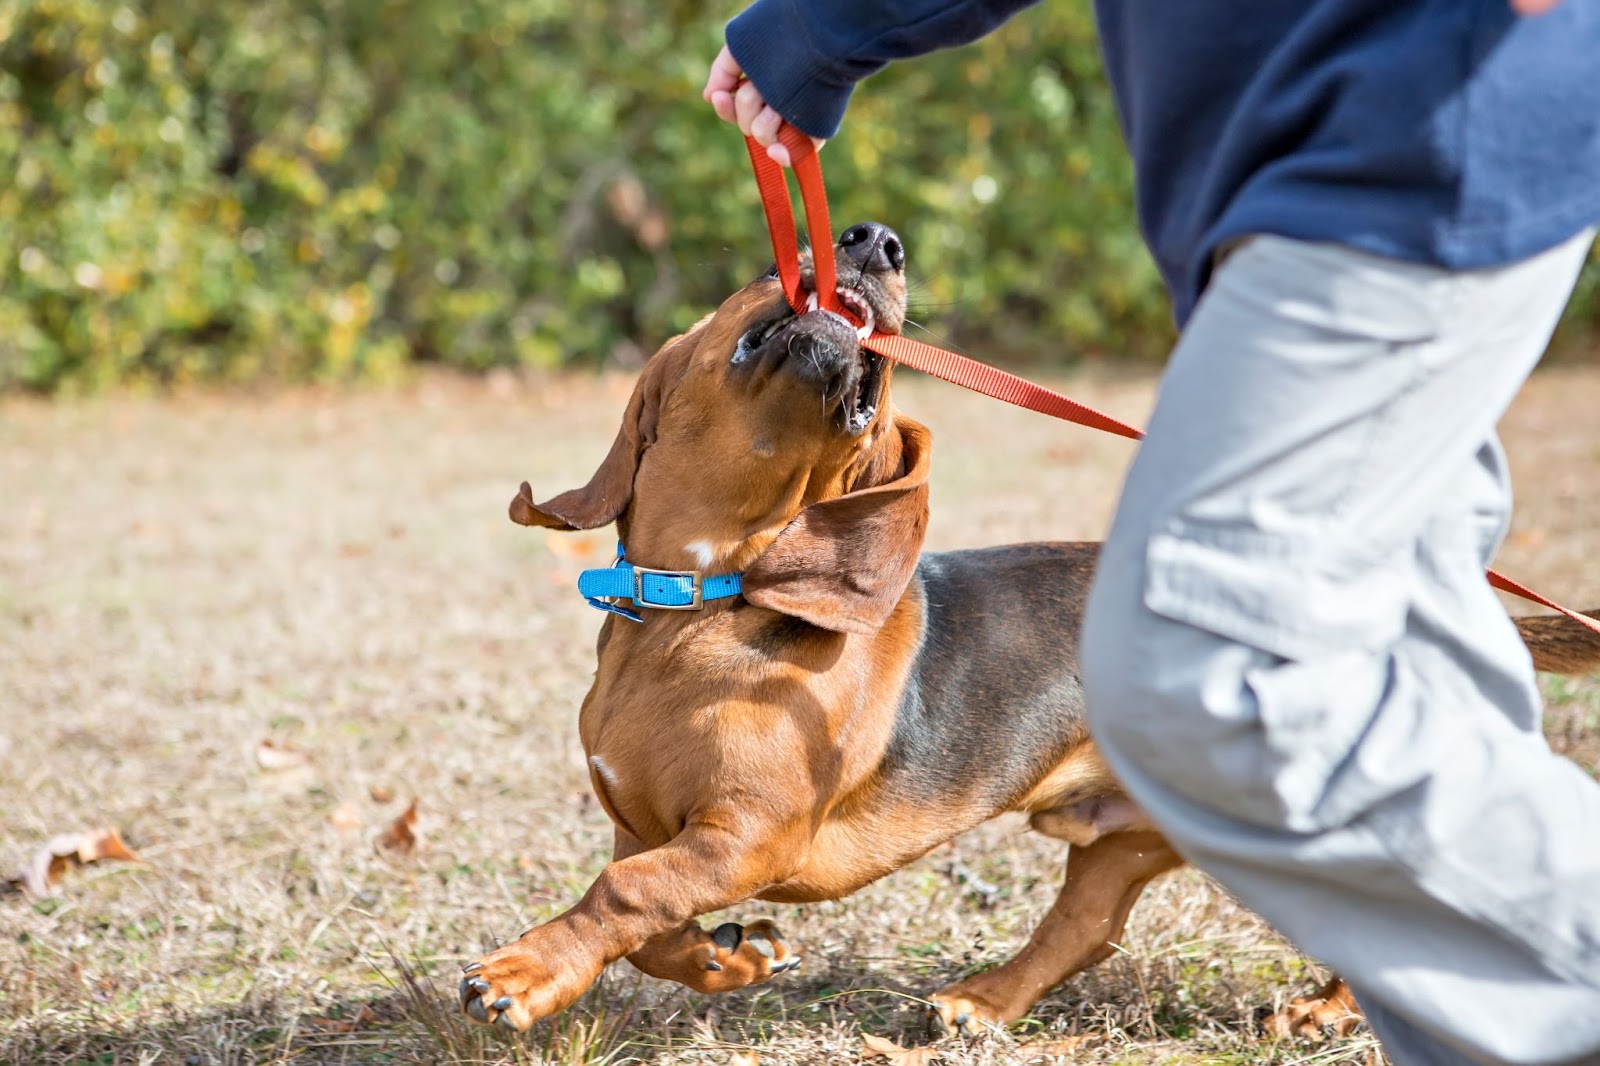 Playful brown dog tugging on red leash, person partially visible.